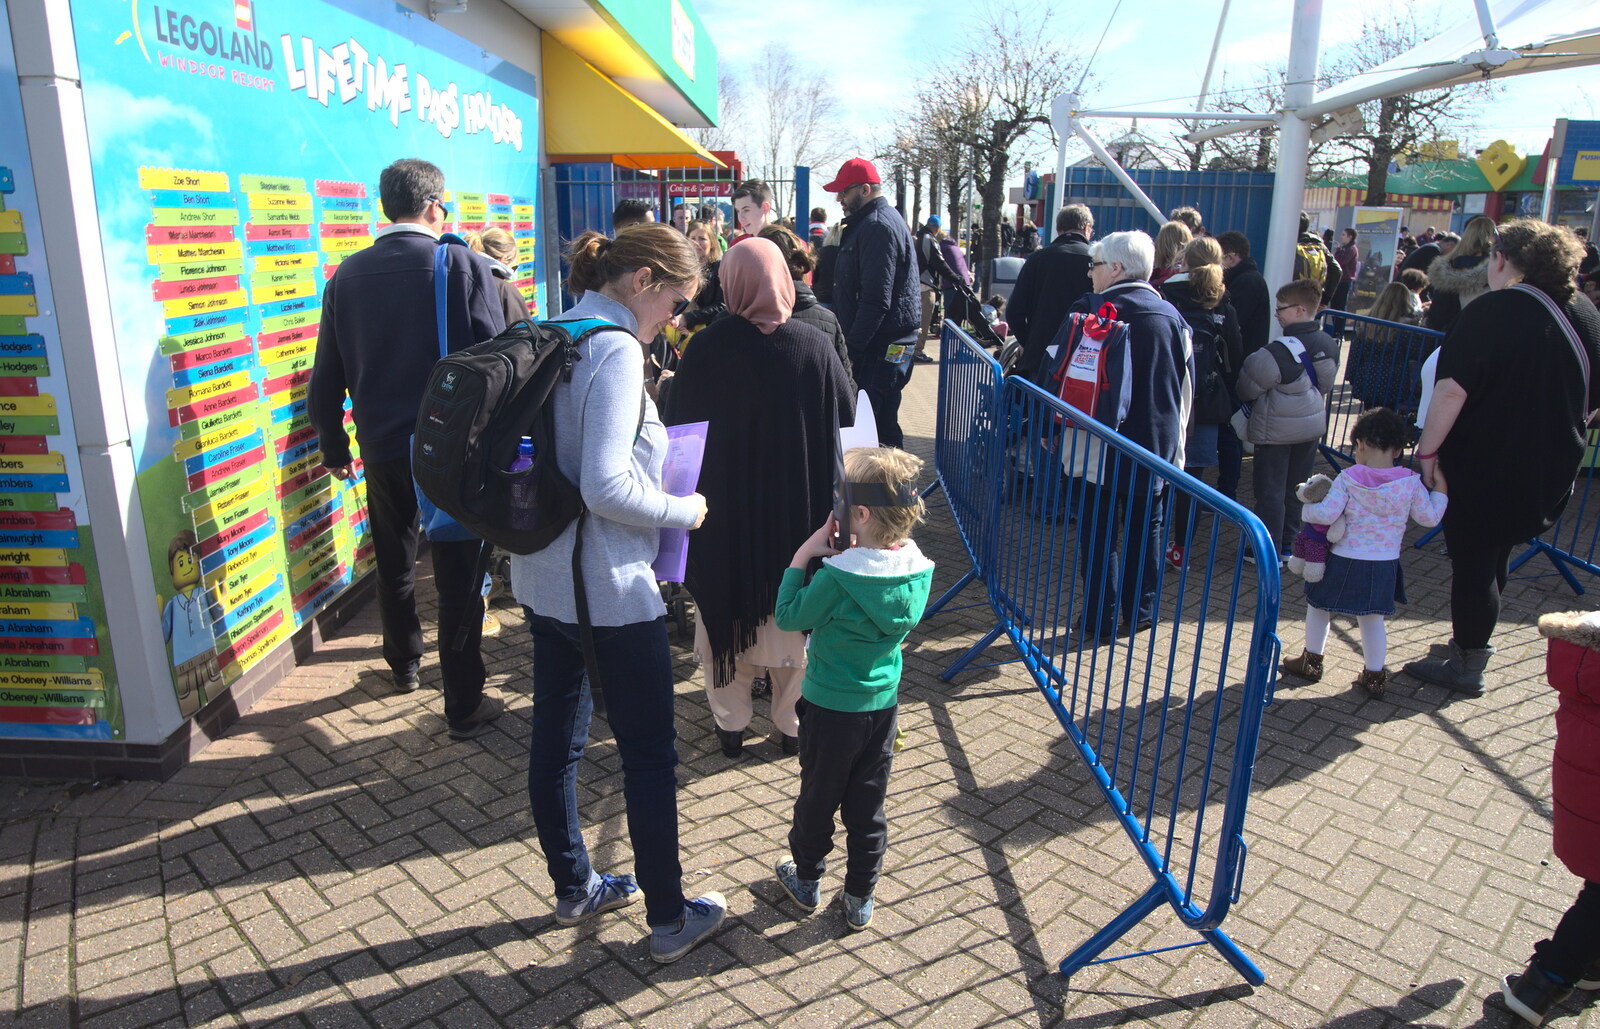 Isobel and Harry in the queue from A Trip to Legoland, Windsor, Berkshire - 25th March 2017